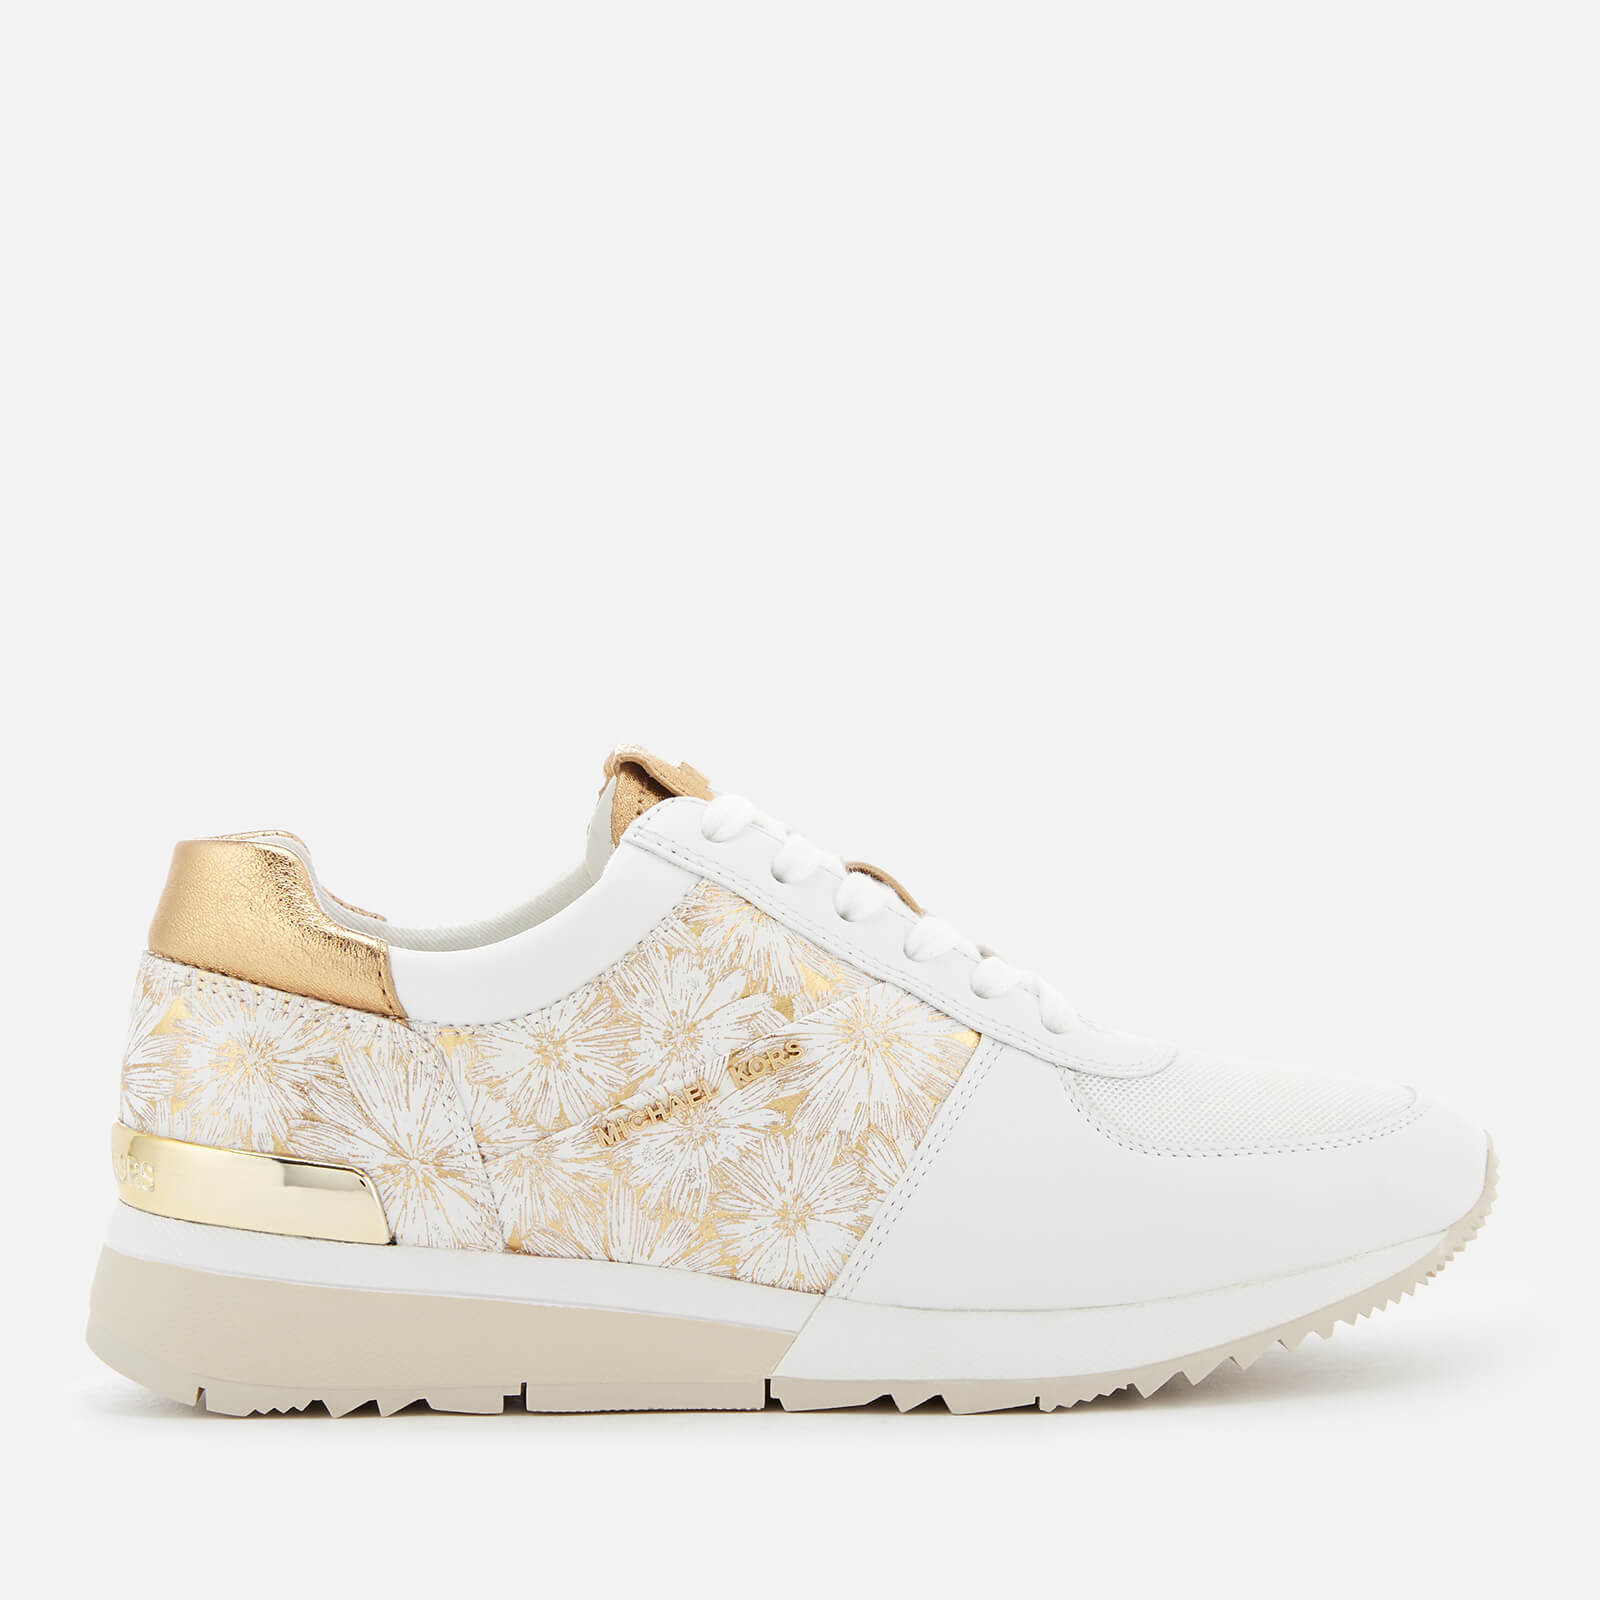 michael kors white and gold trainers